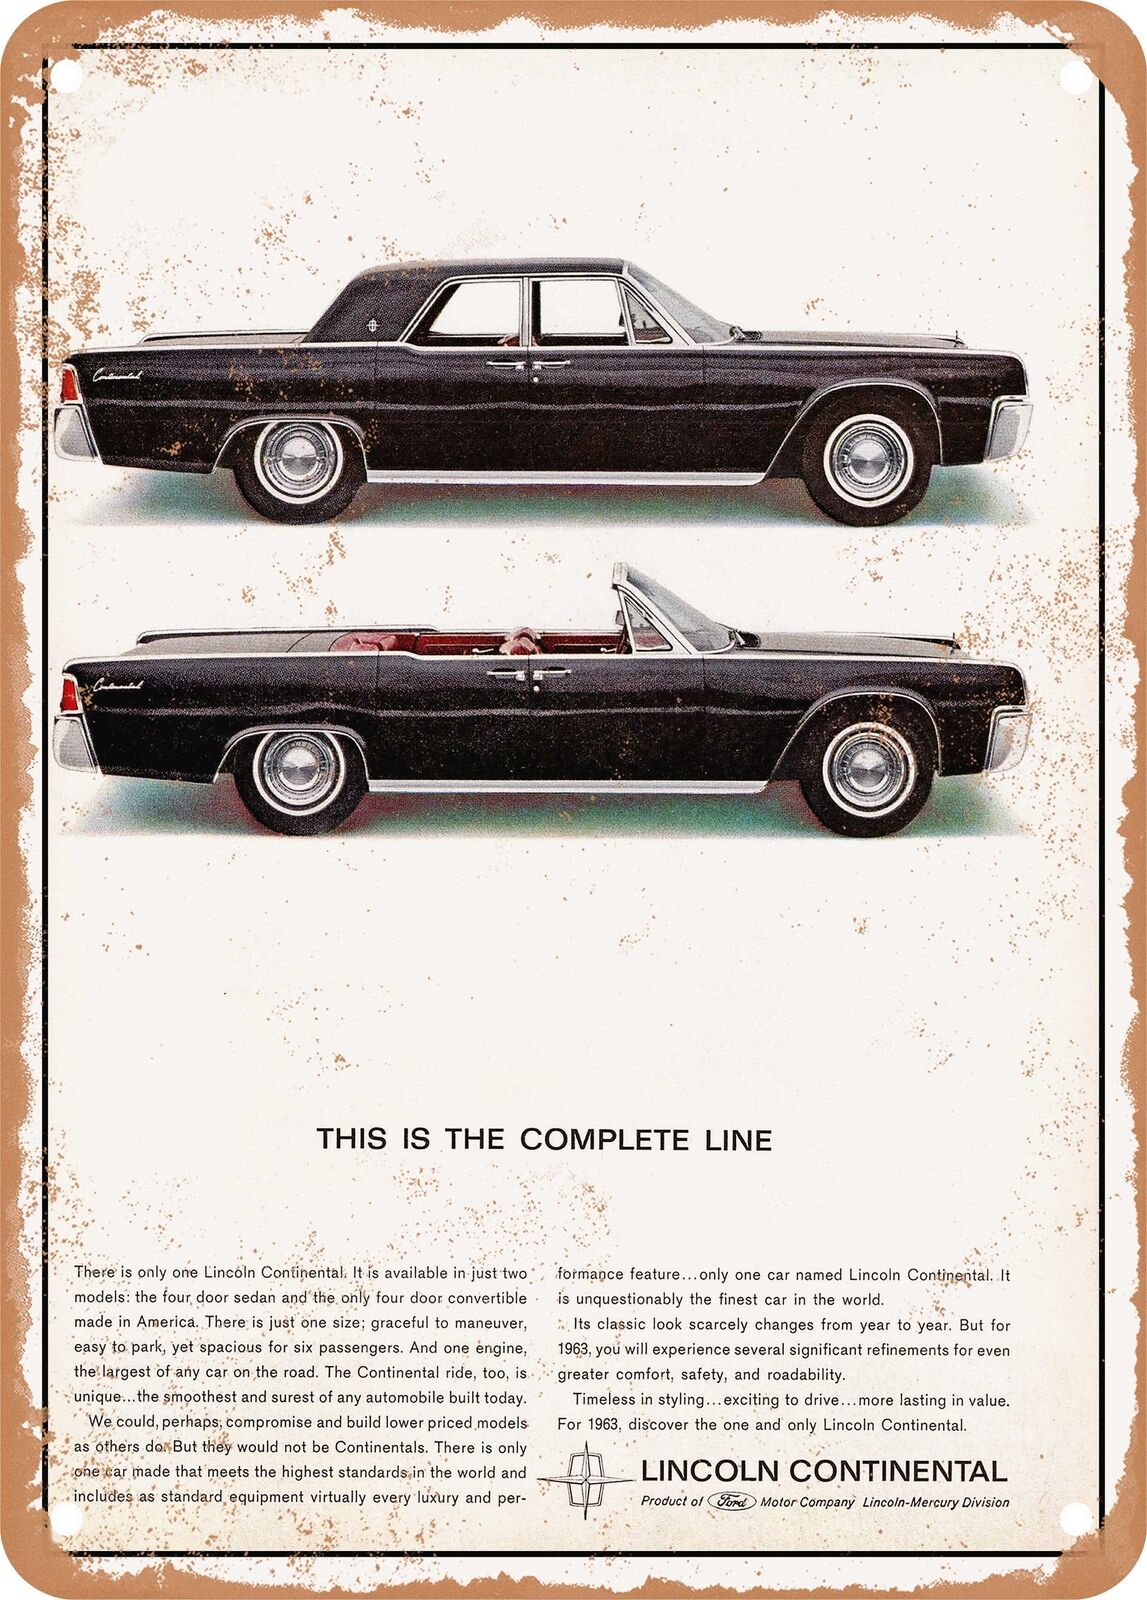 METAL SIGN - 1963 Lincoln Continental Sedan and Convertible Vintage Ad